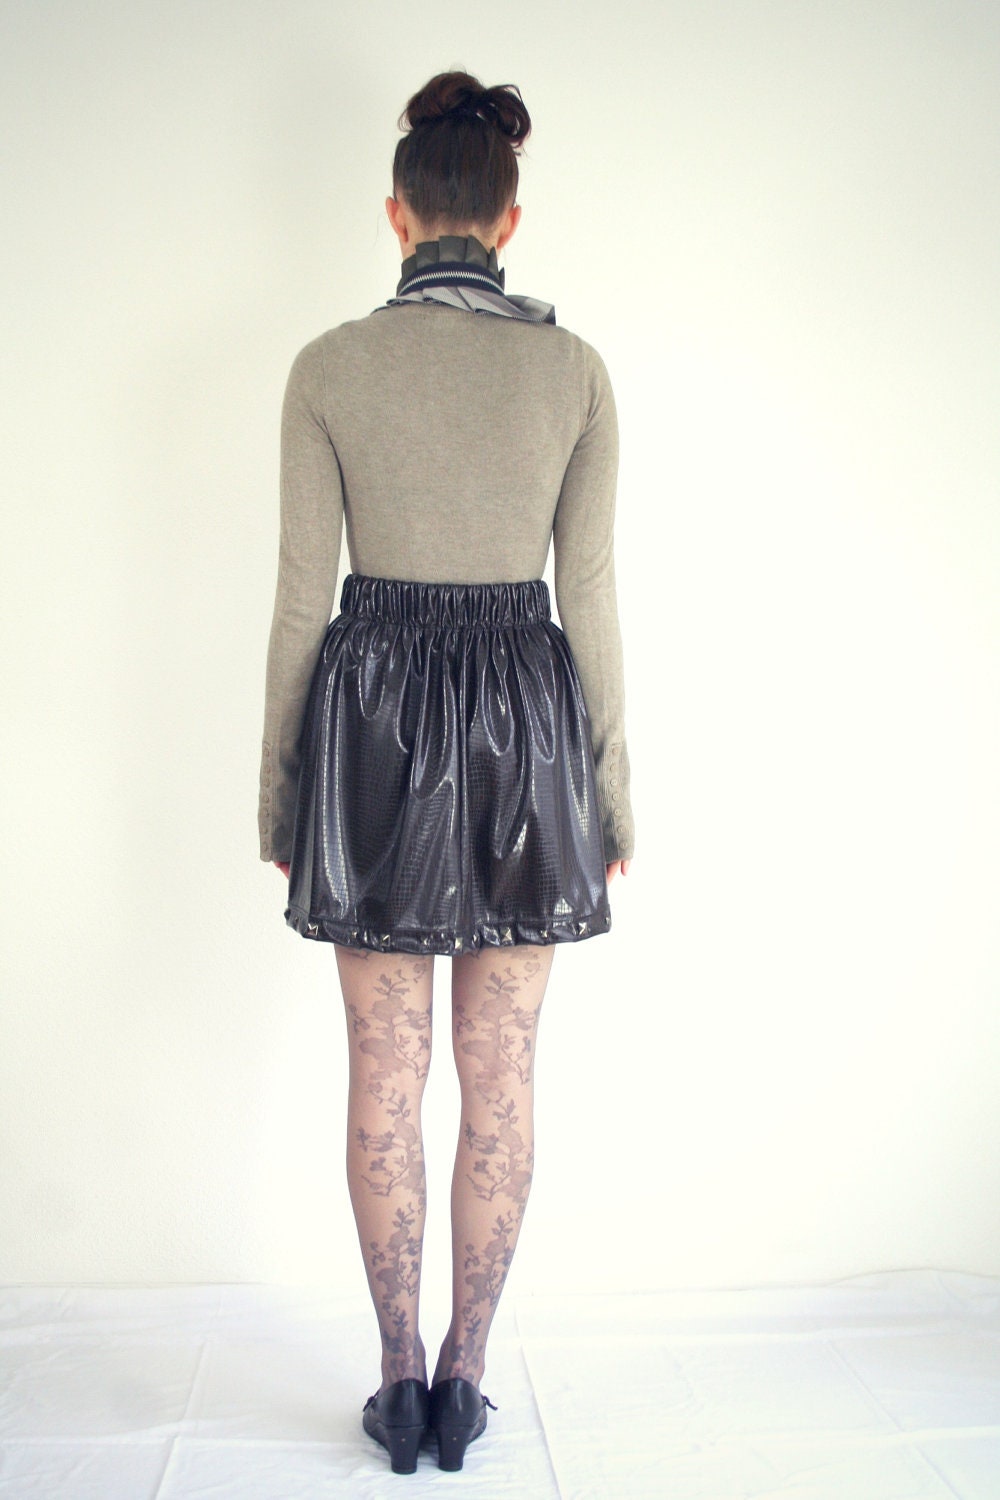 Studded skirt in brown, reptile pattern, MADE to ORDER in extra small, small, medium and large XS S M L, vinyl like